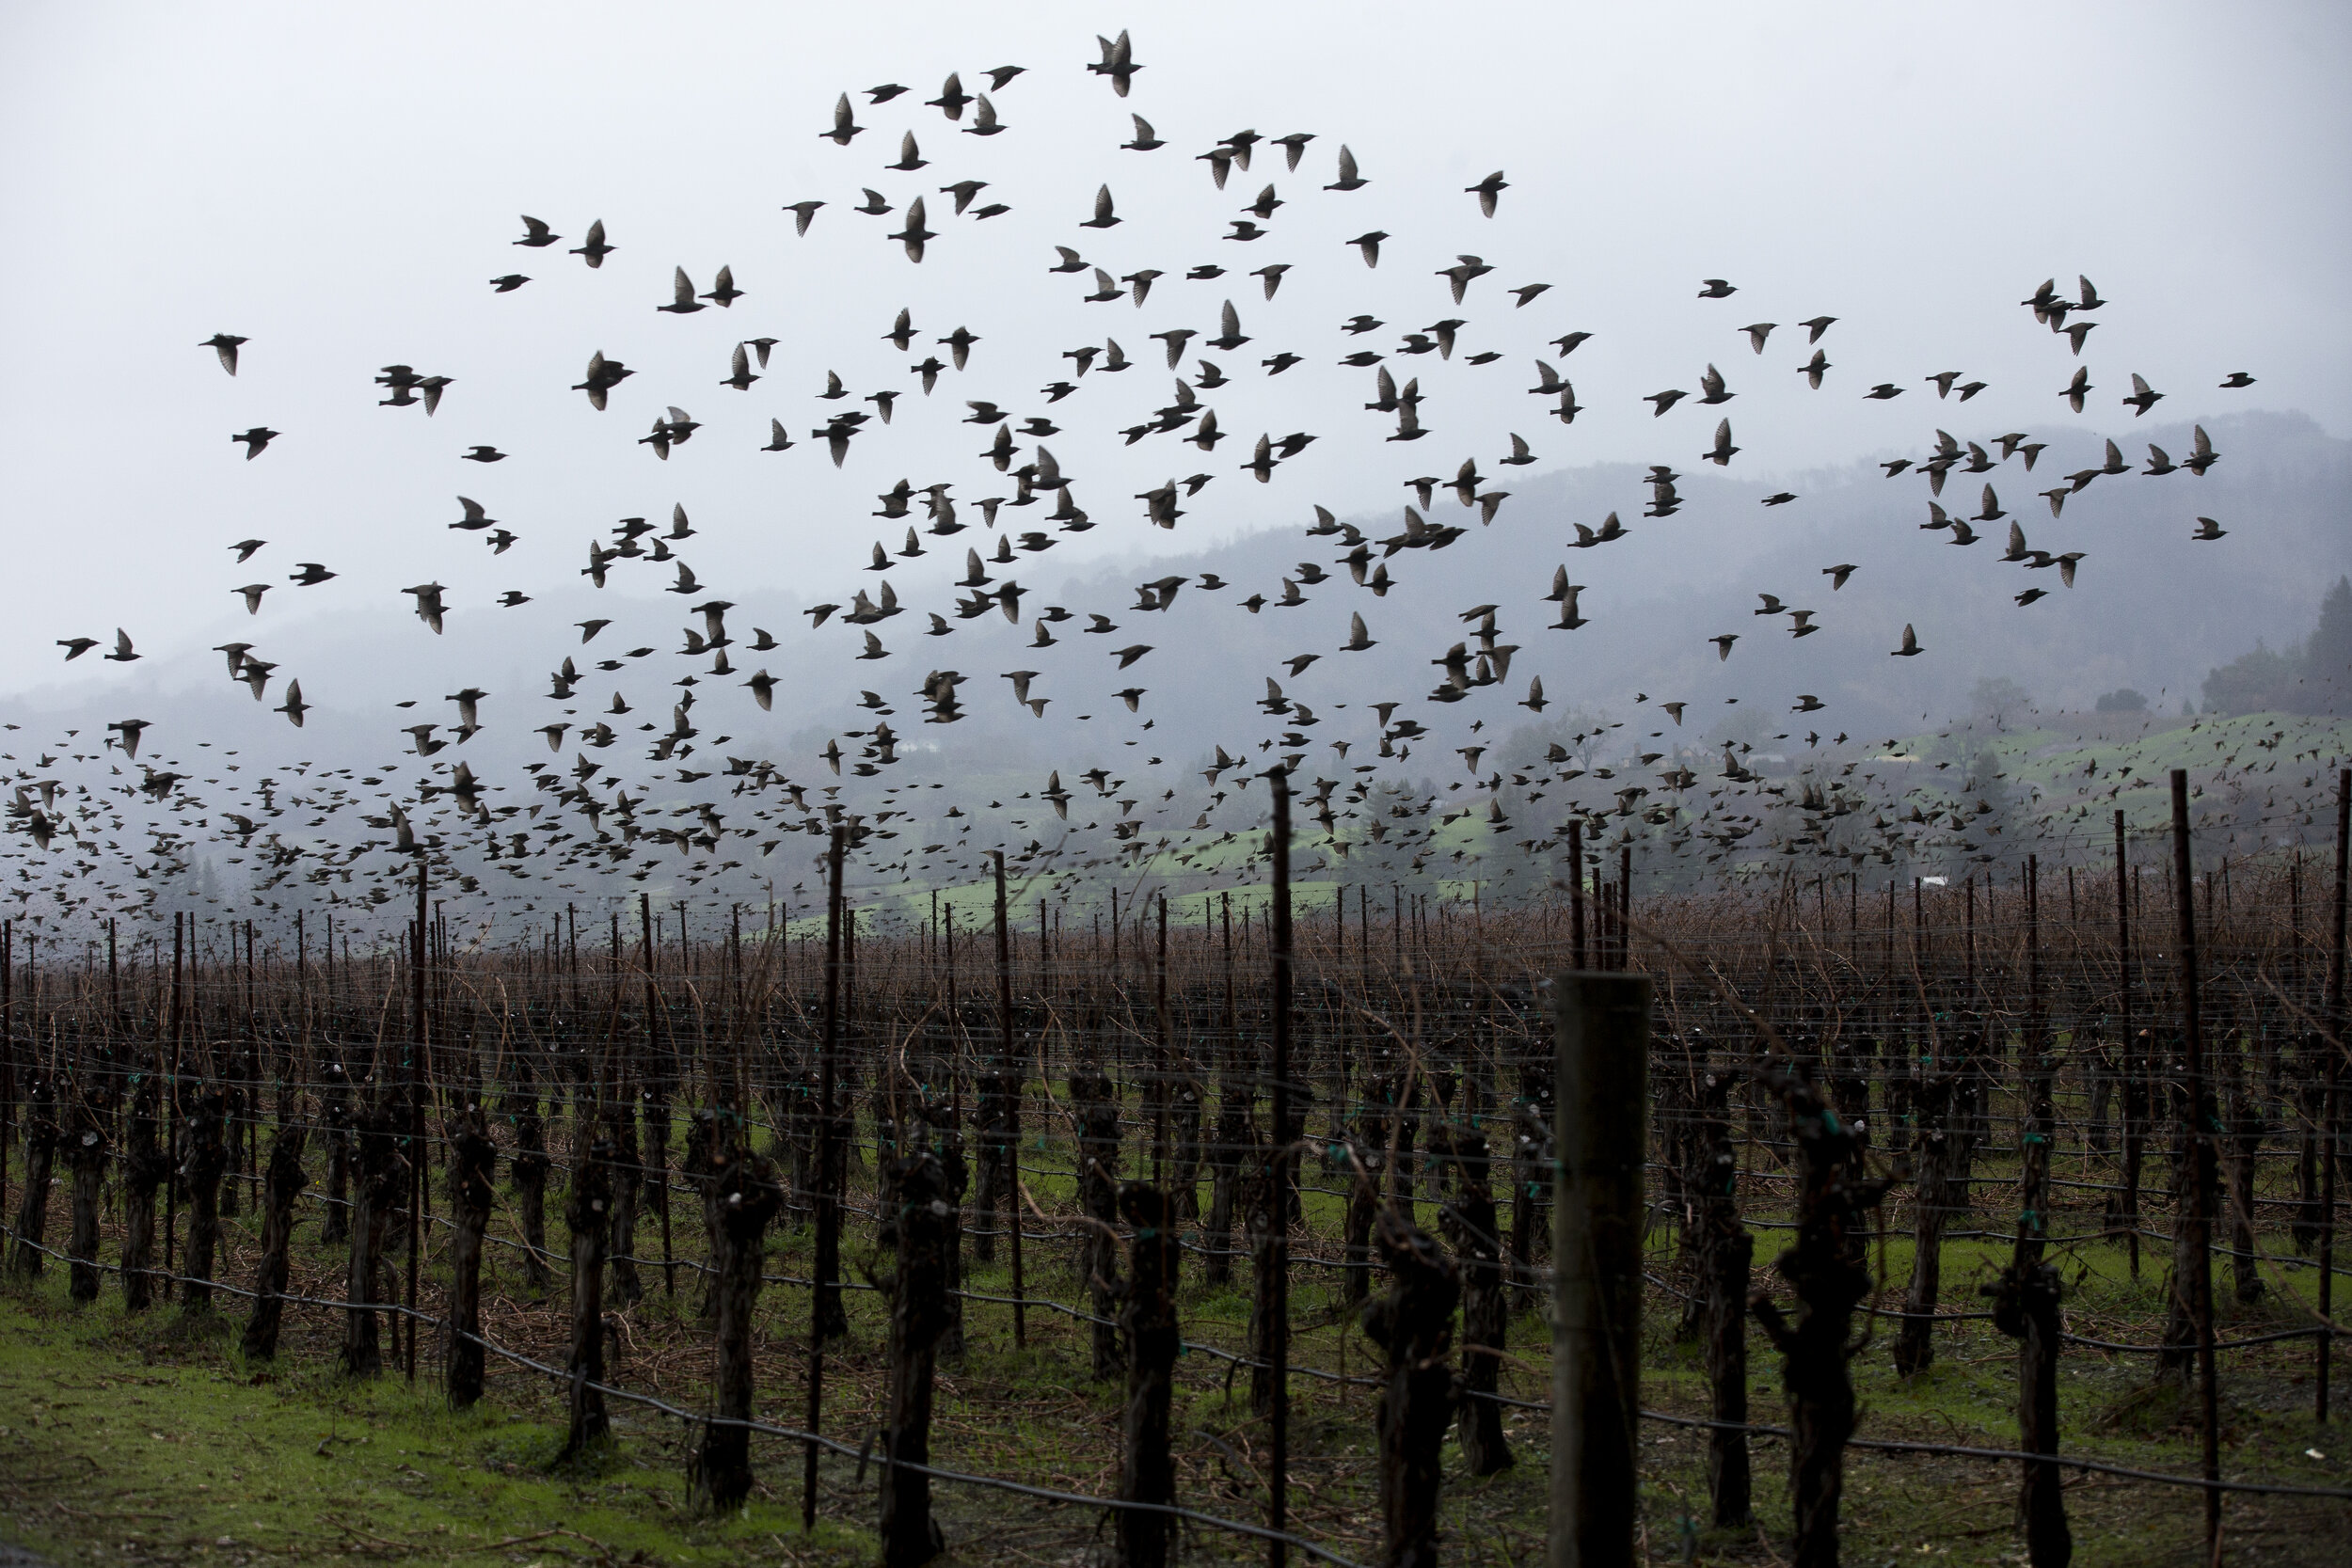  Birds fly over a vineyard in Sonoma Country, California.  